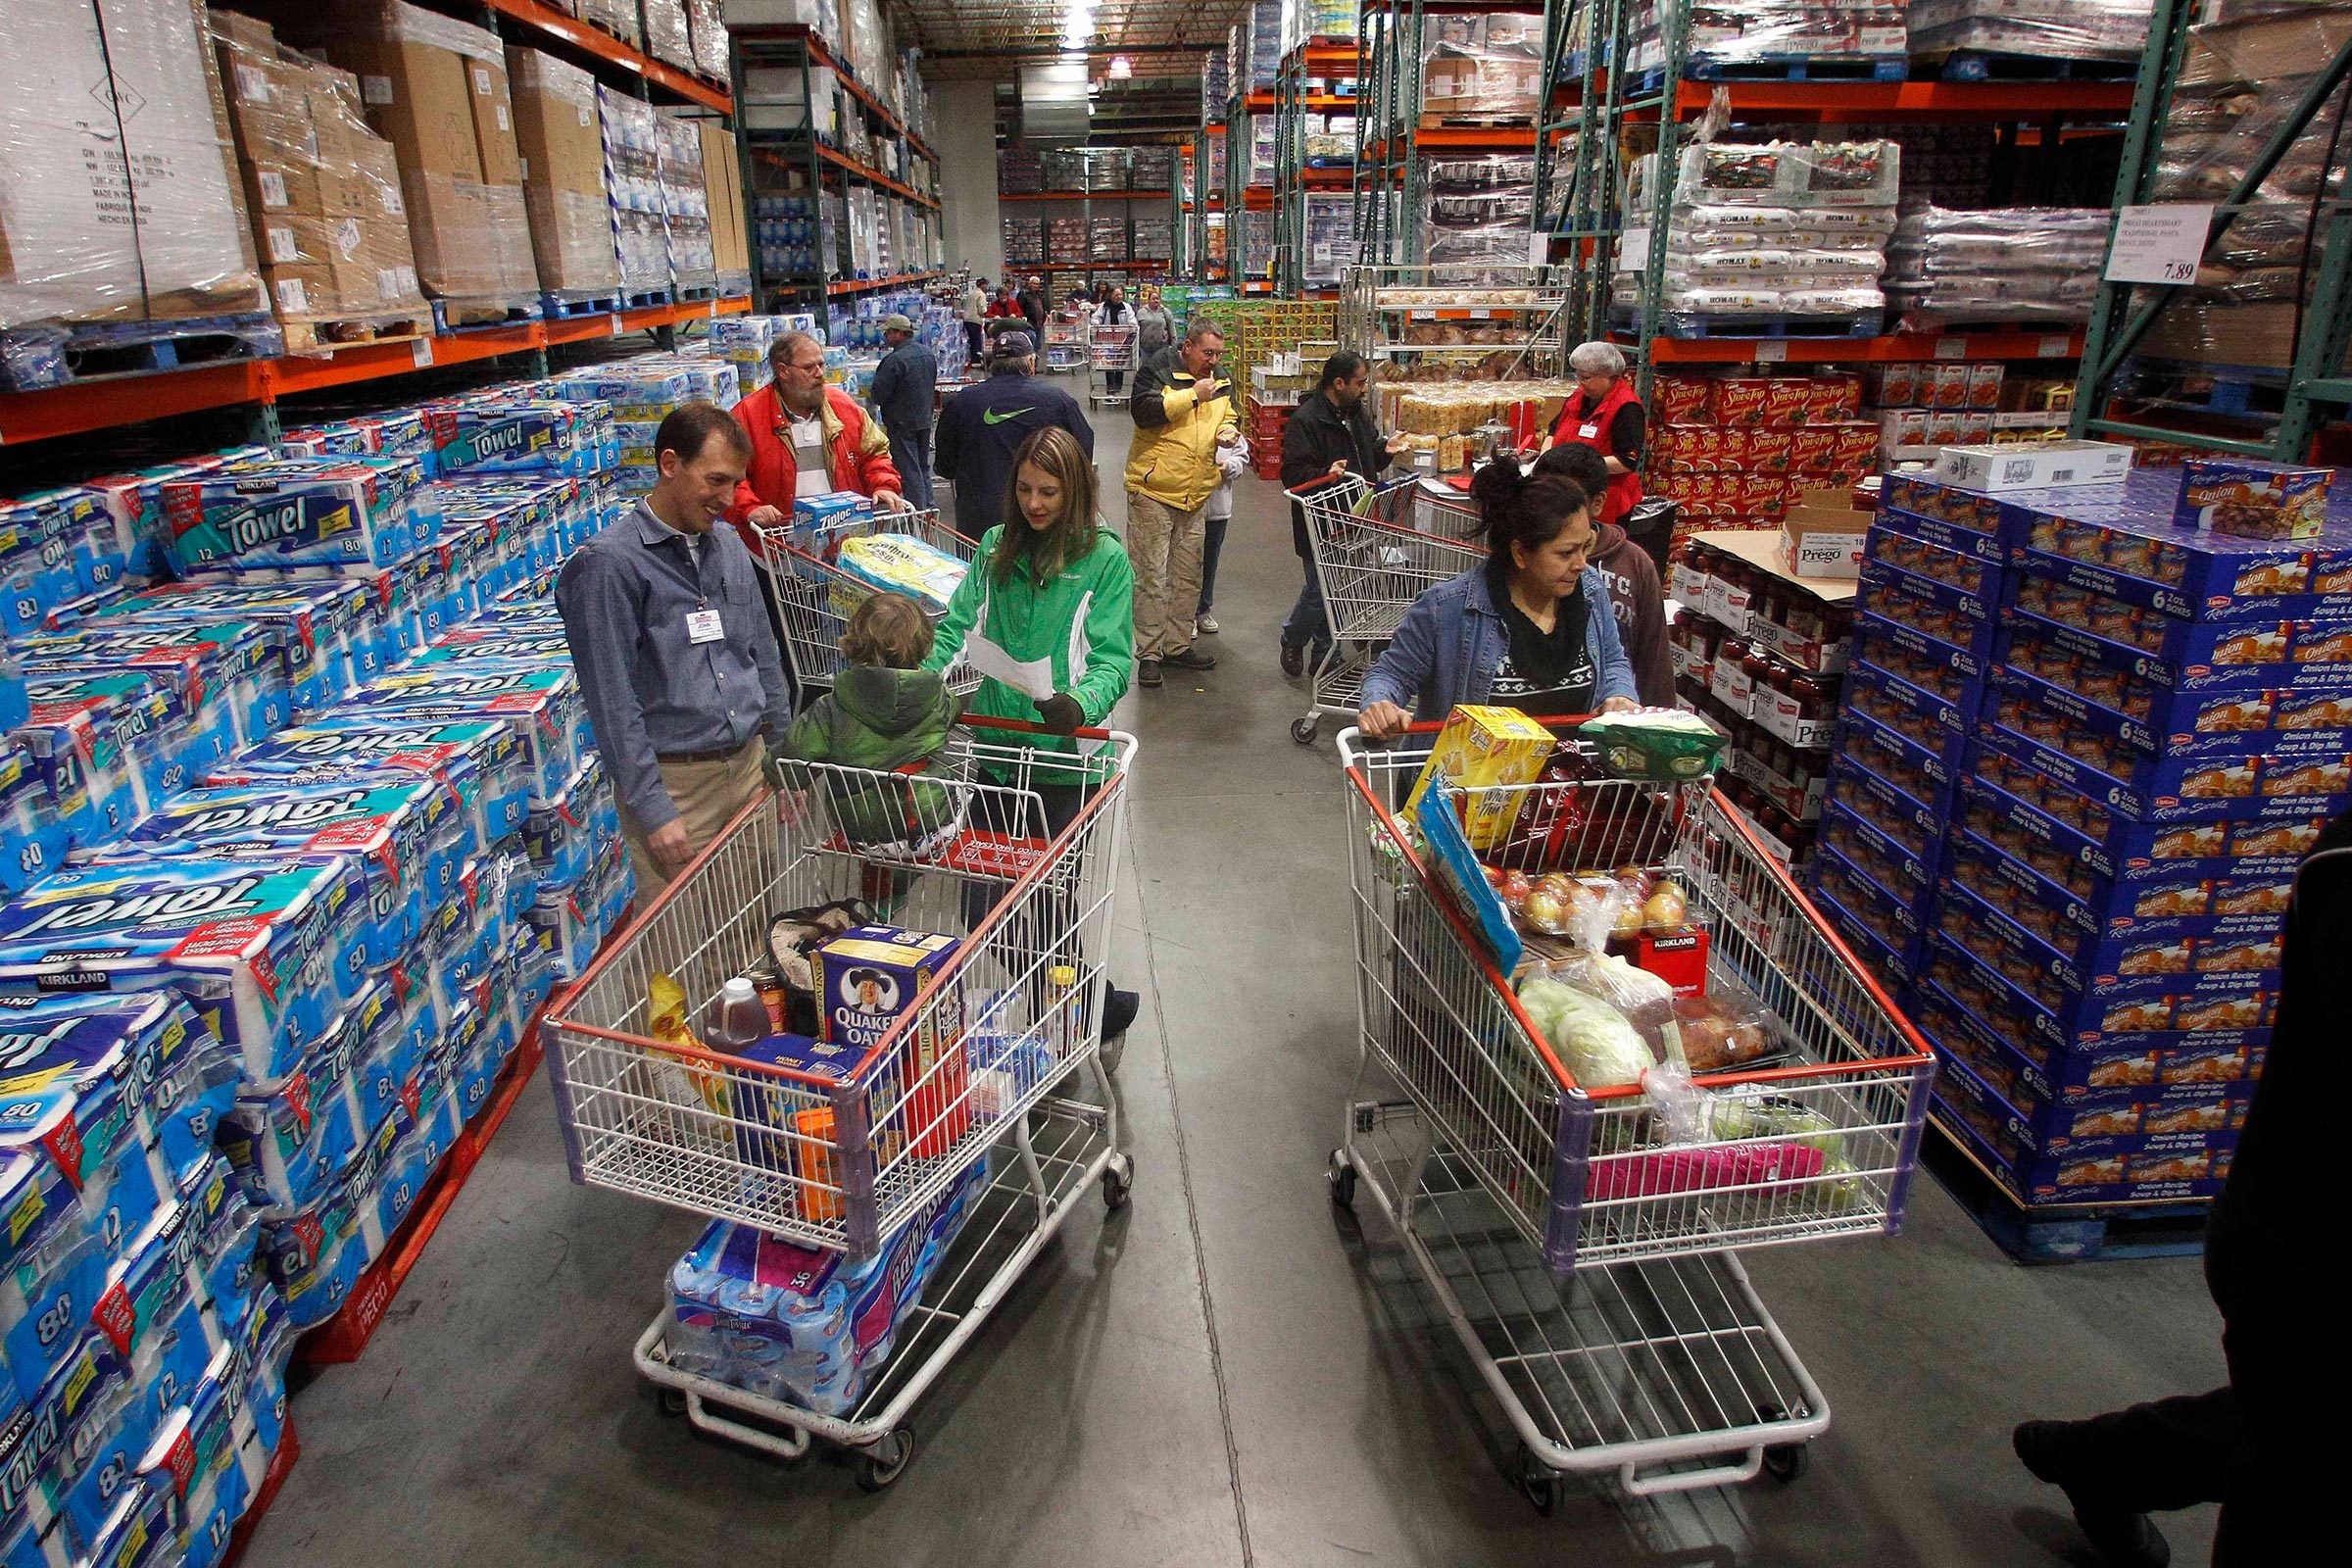 What are the rules for using bags at Costco? - Quora